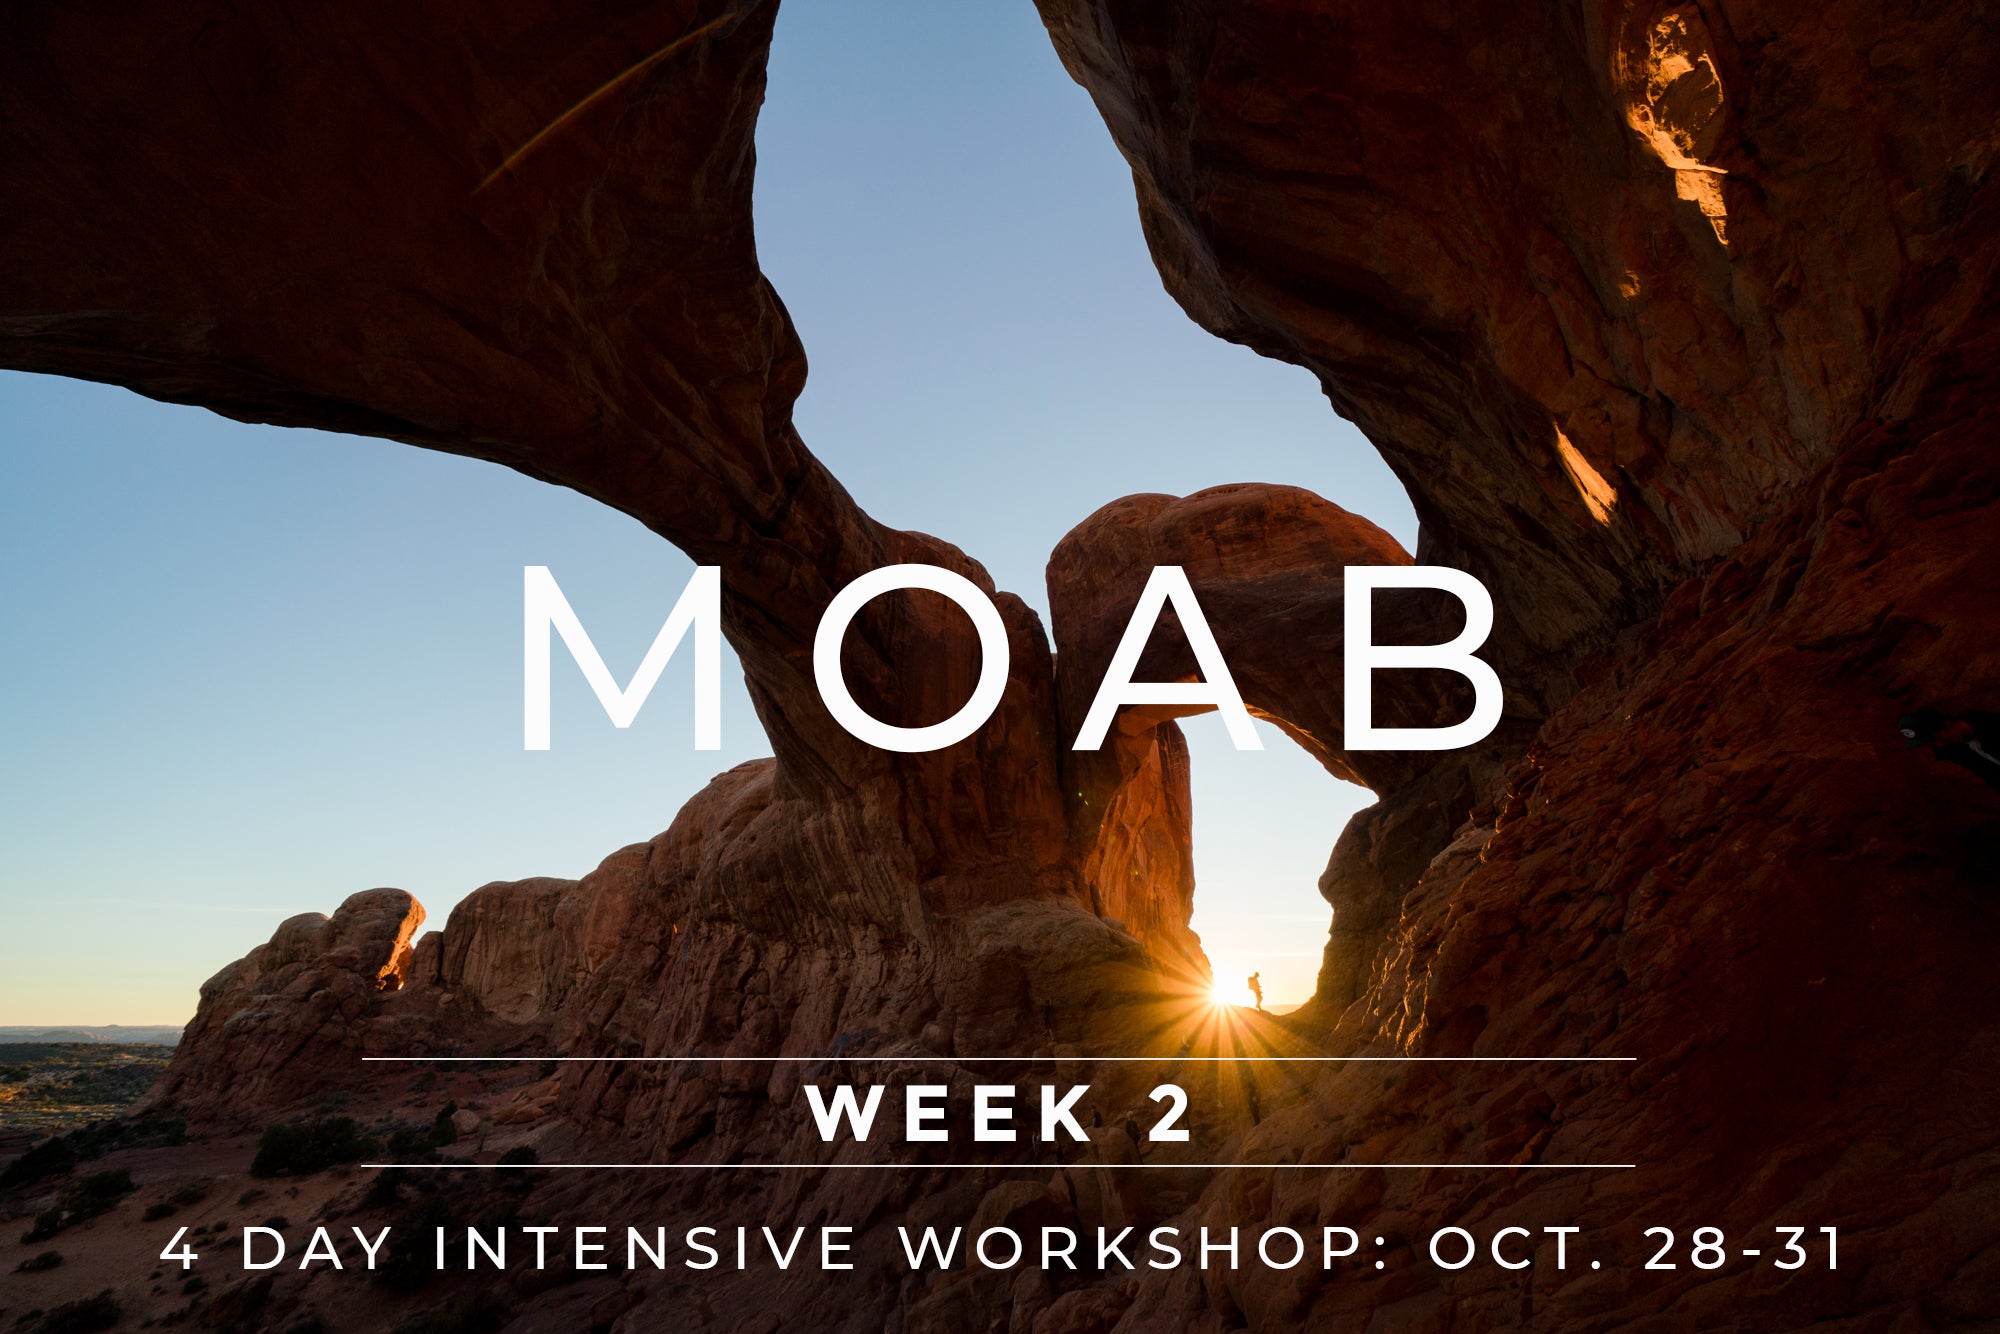 Moab Photography Workshop - Oct. 28-31 Final Payment